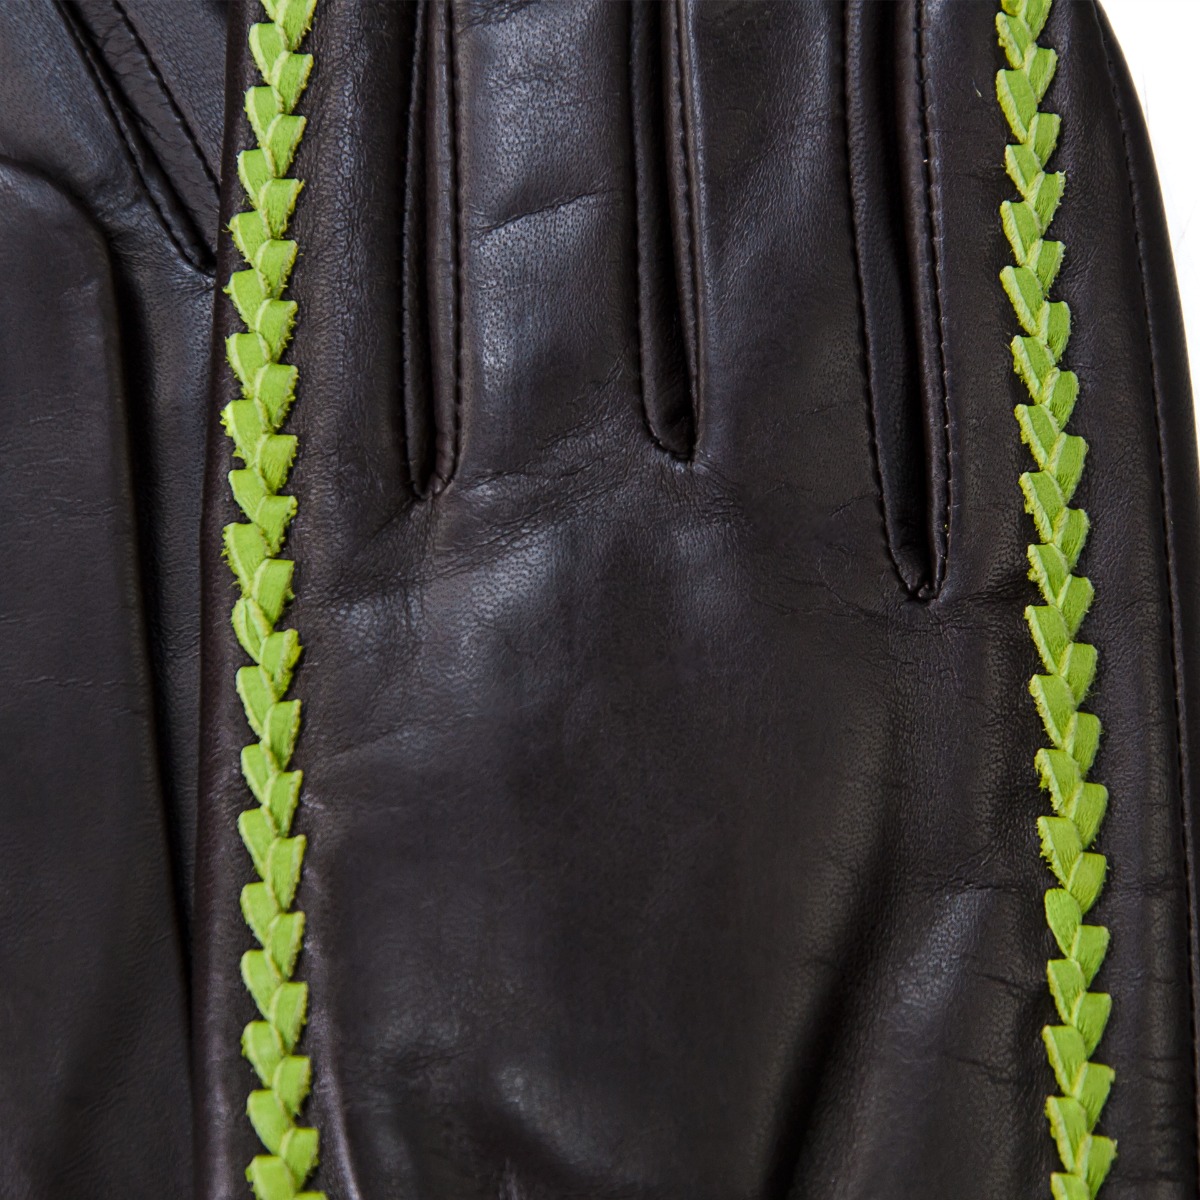 Leather gloves M - Allora image 3